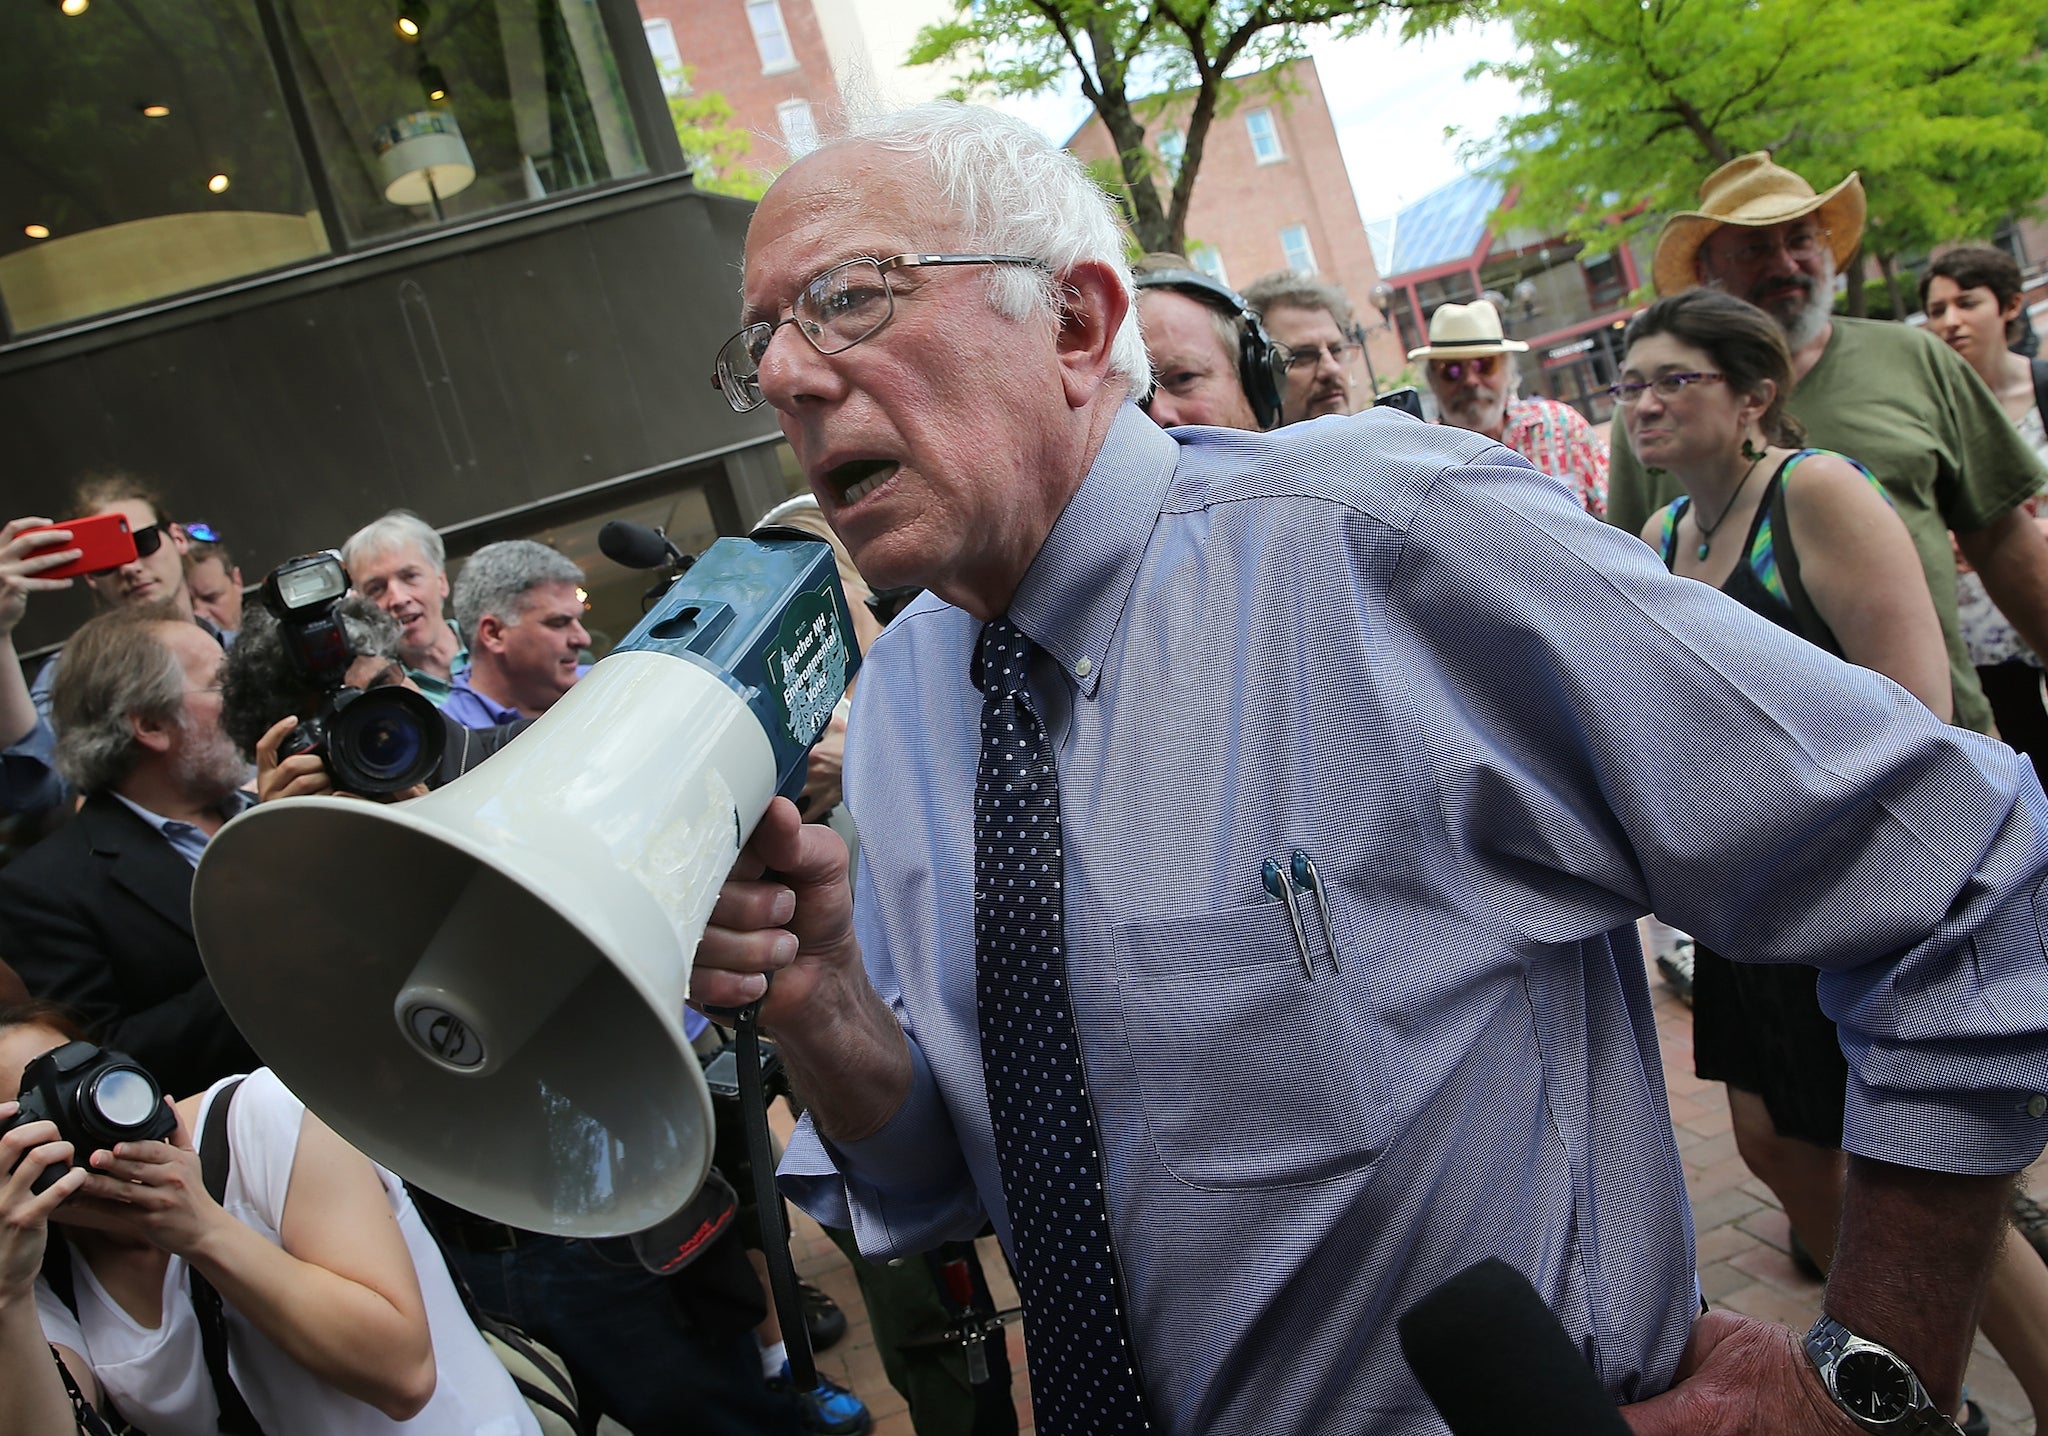 Democratic presidential candidate Bernie Sanders speaks to a crowd through megaphone after a campaign event at New England College on 27 May 2015 in Concord, New Hampshire.